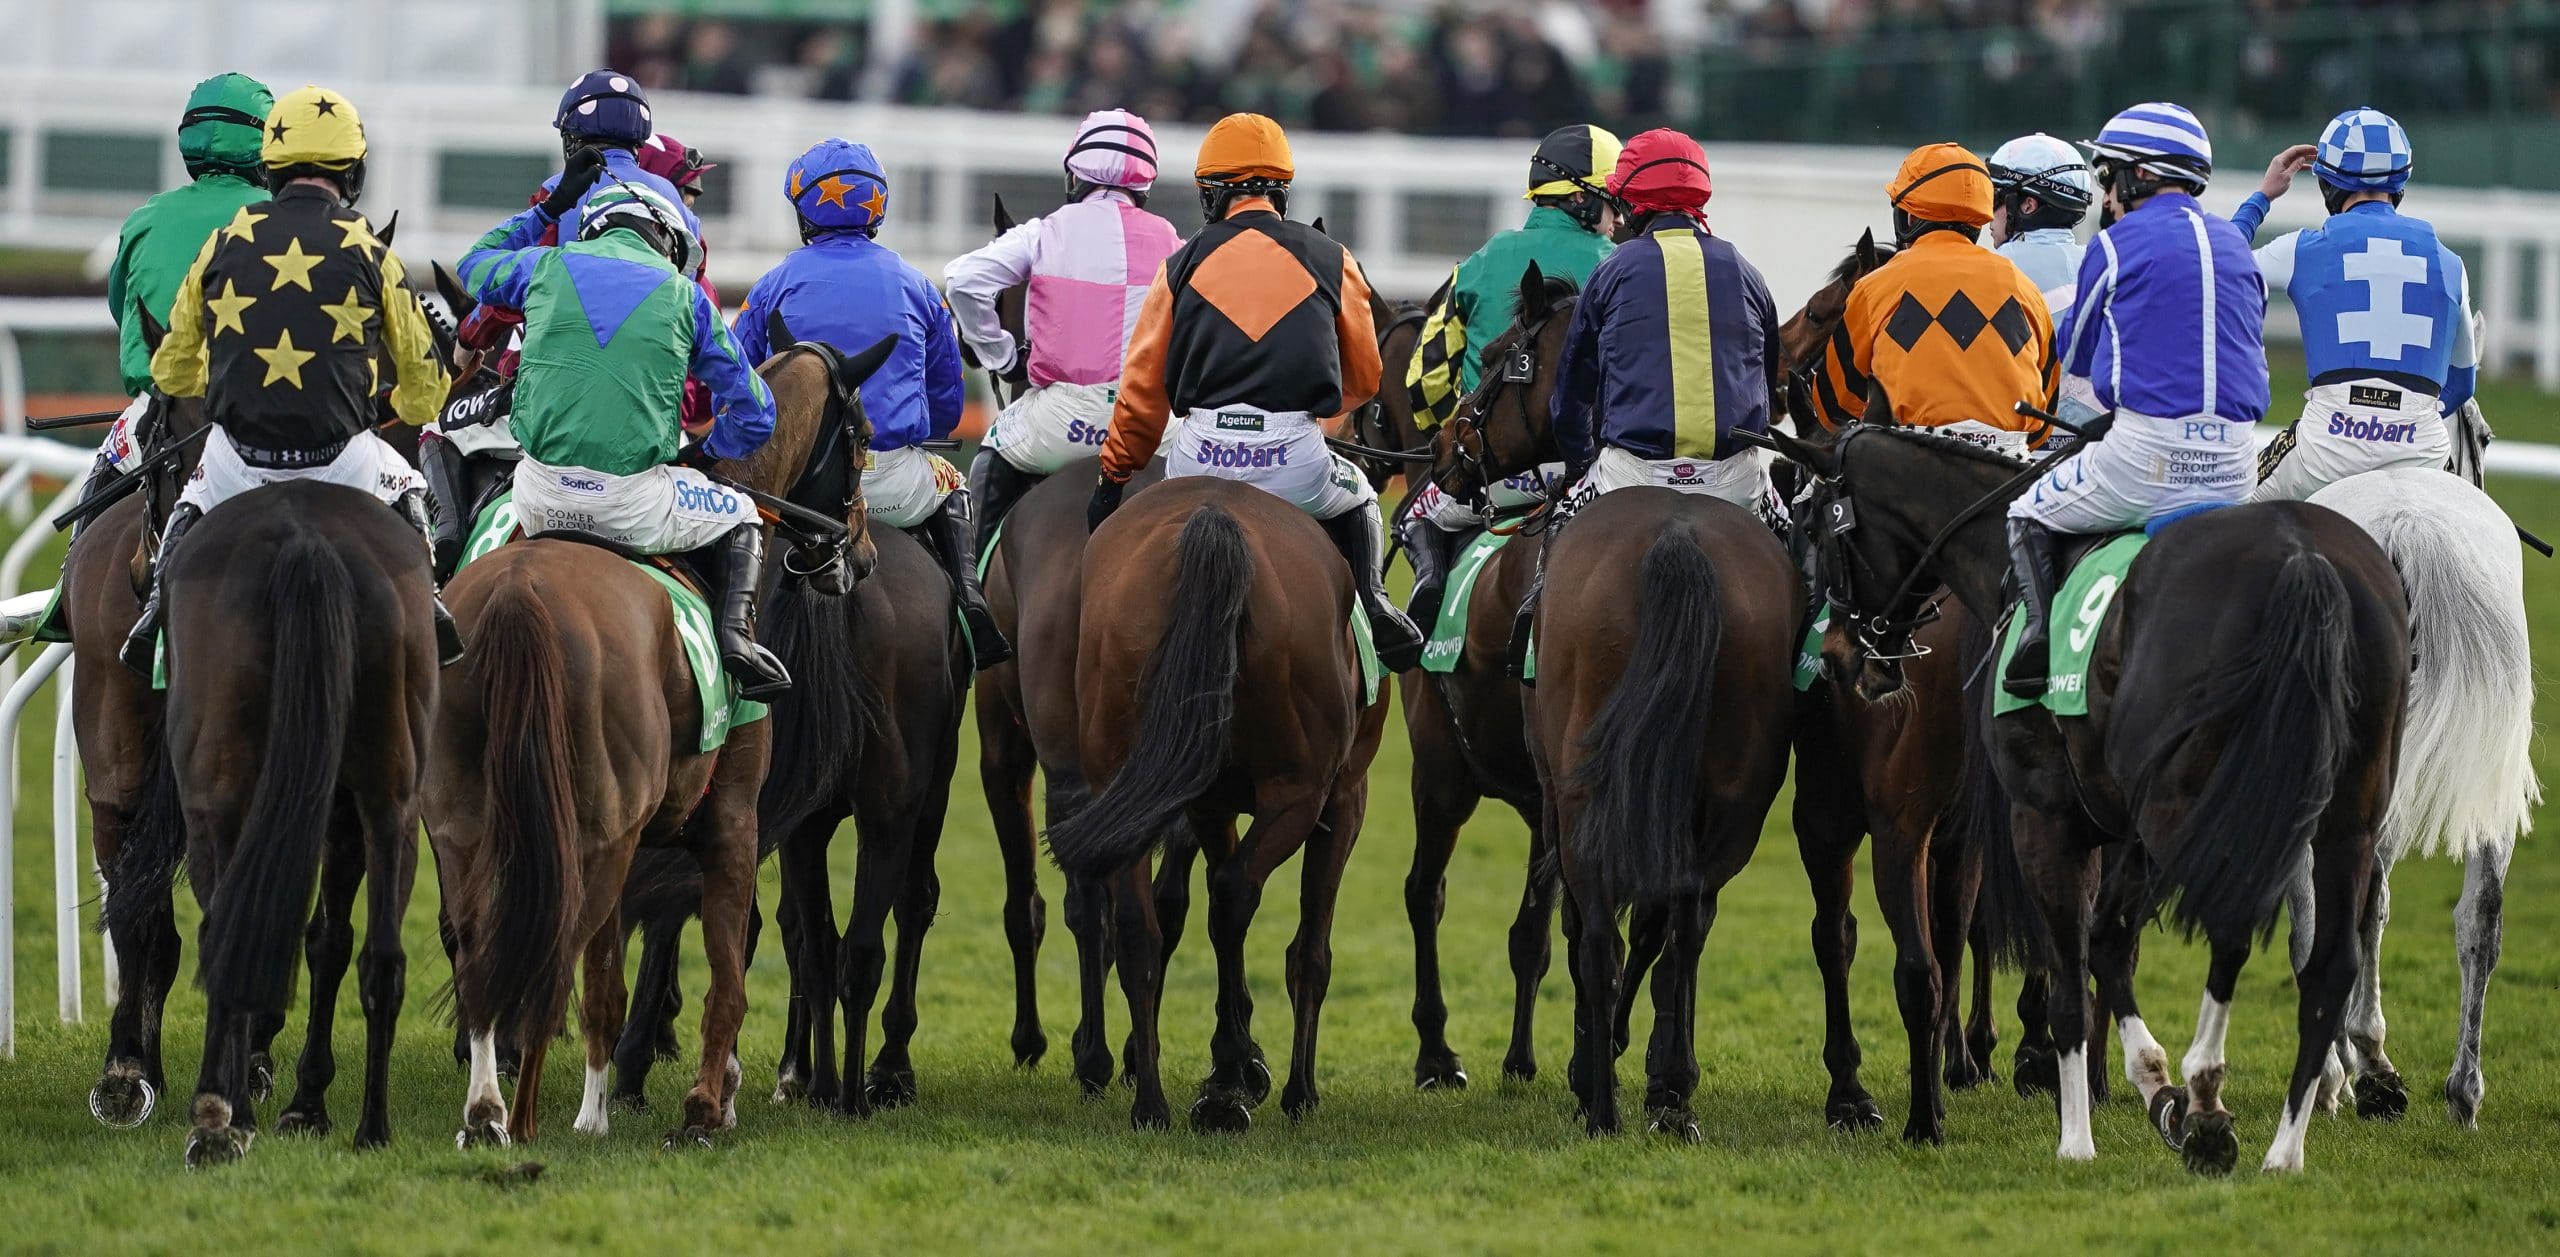 Ayr Gold Cup Racing Tips fixture on Friday and Newbury horses to follow from Newsboy!